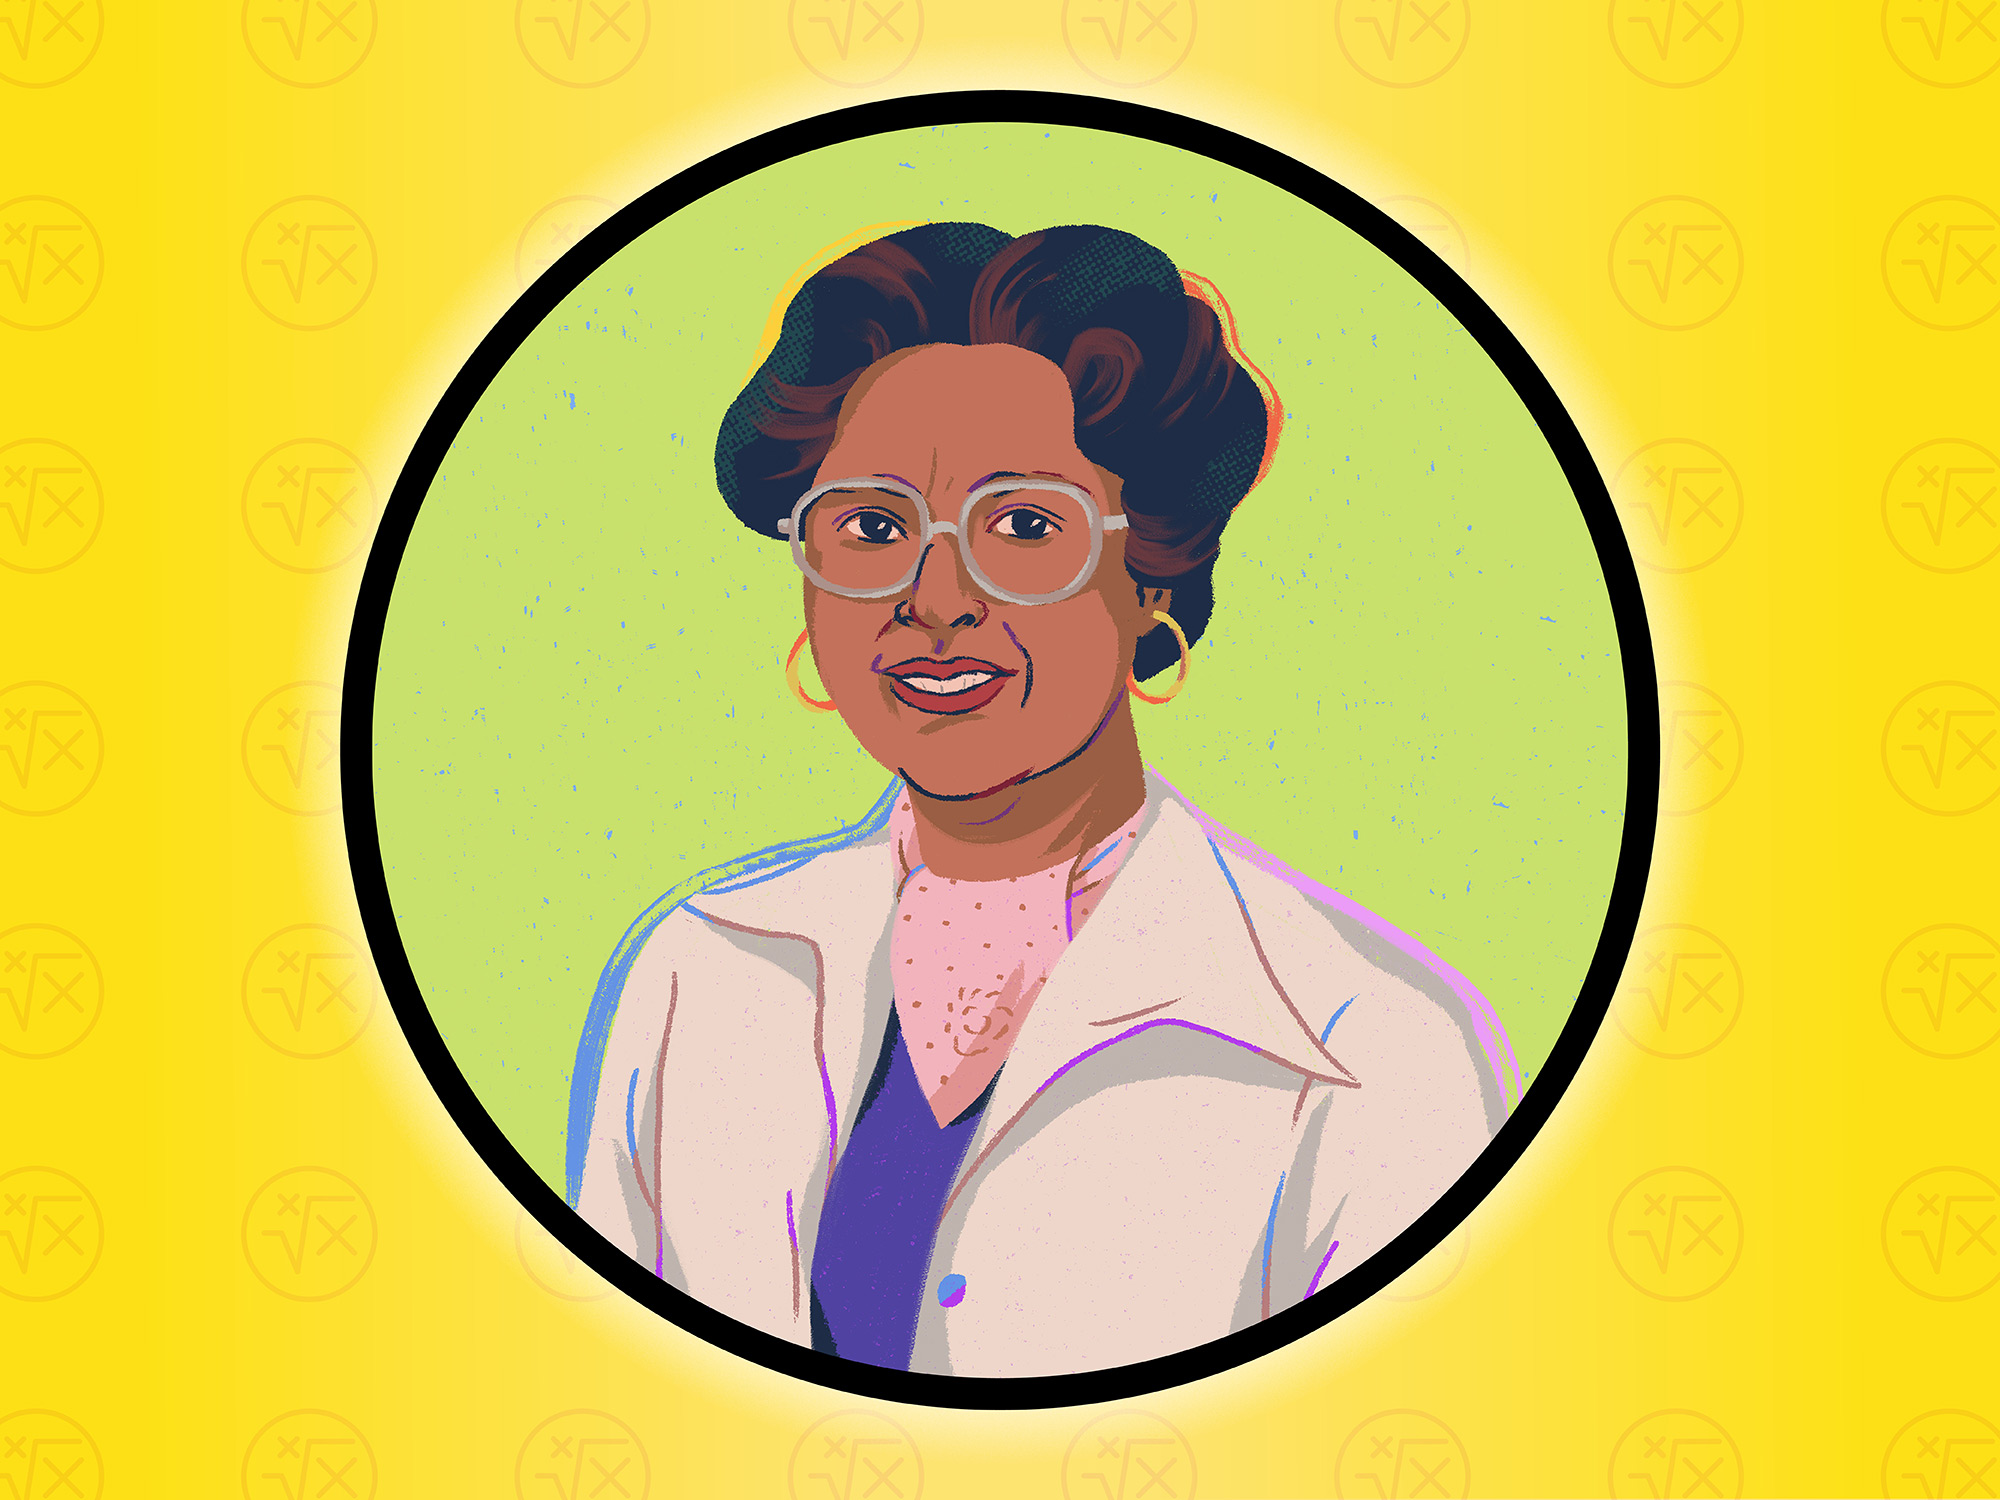 Gladys West’s mathematical prowess helped make GPS possible